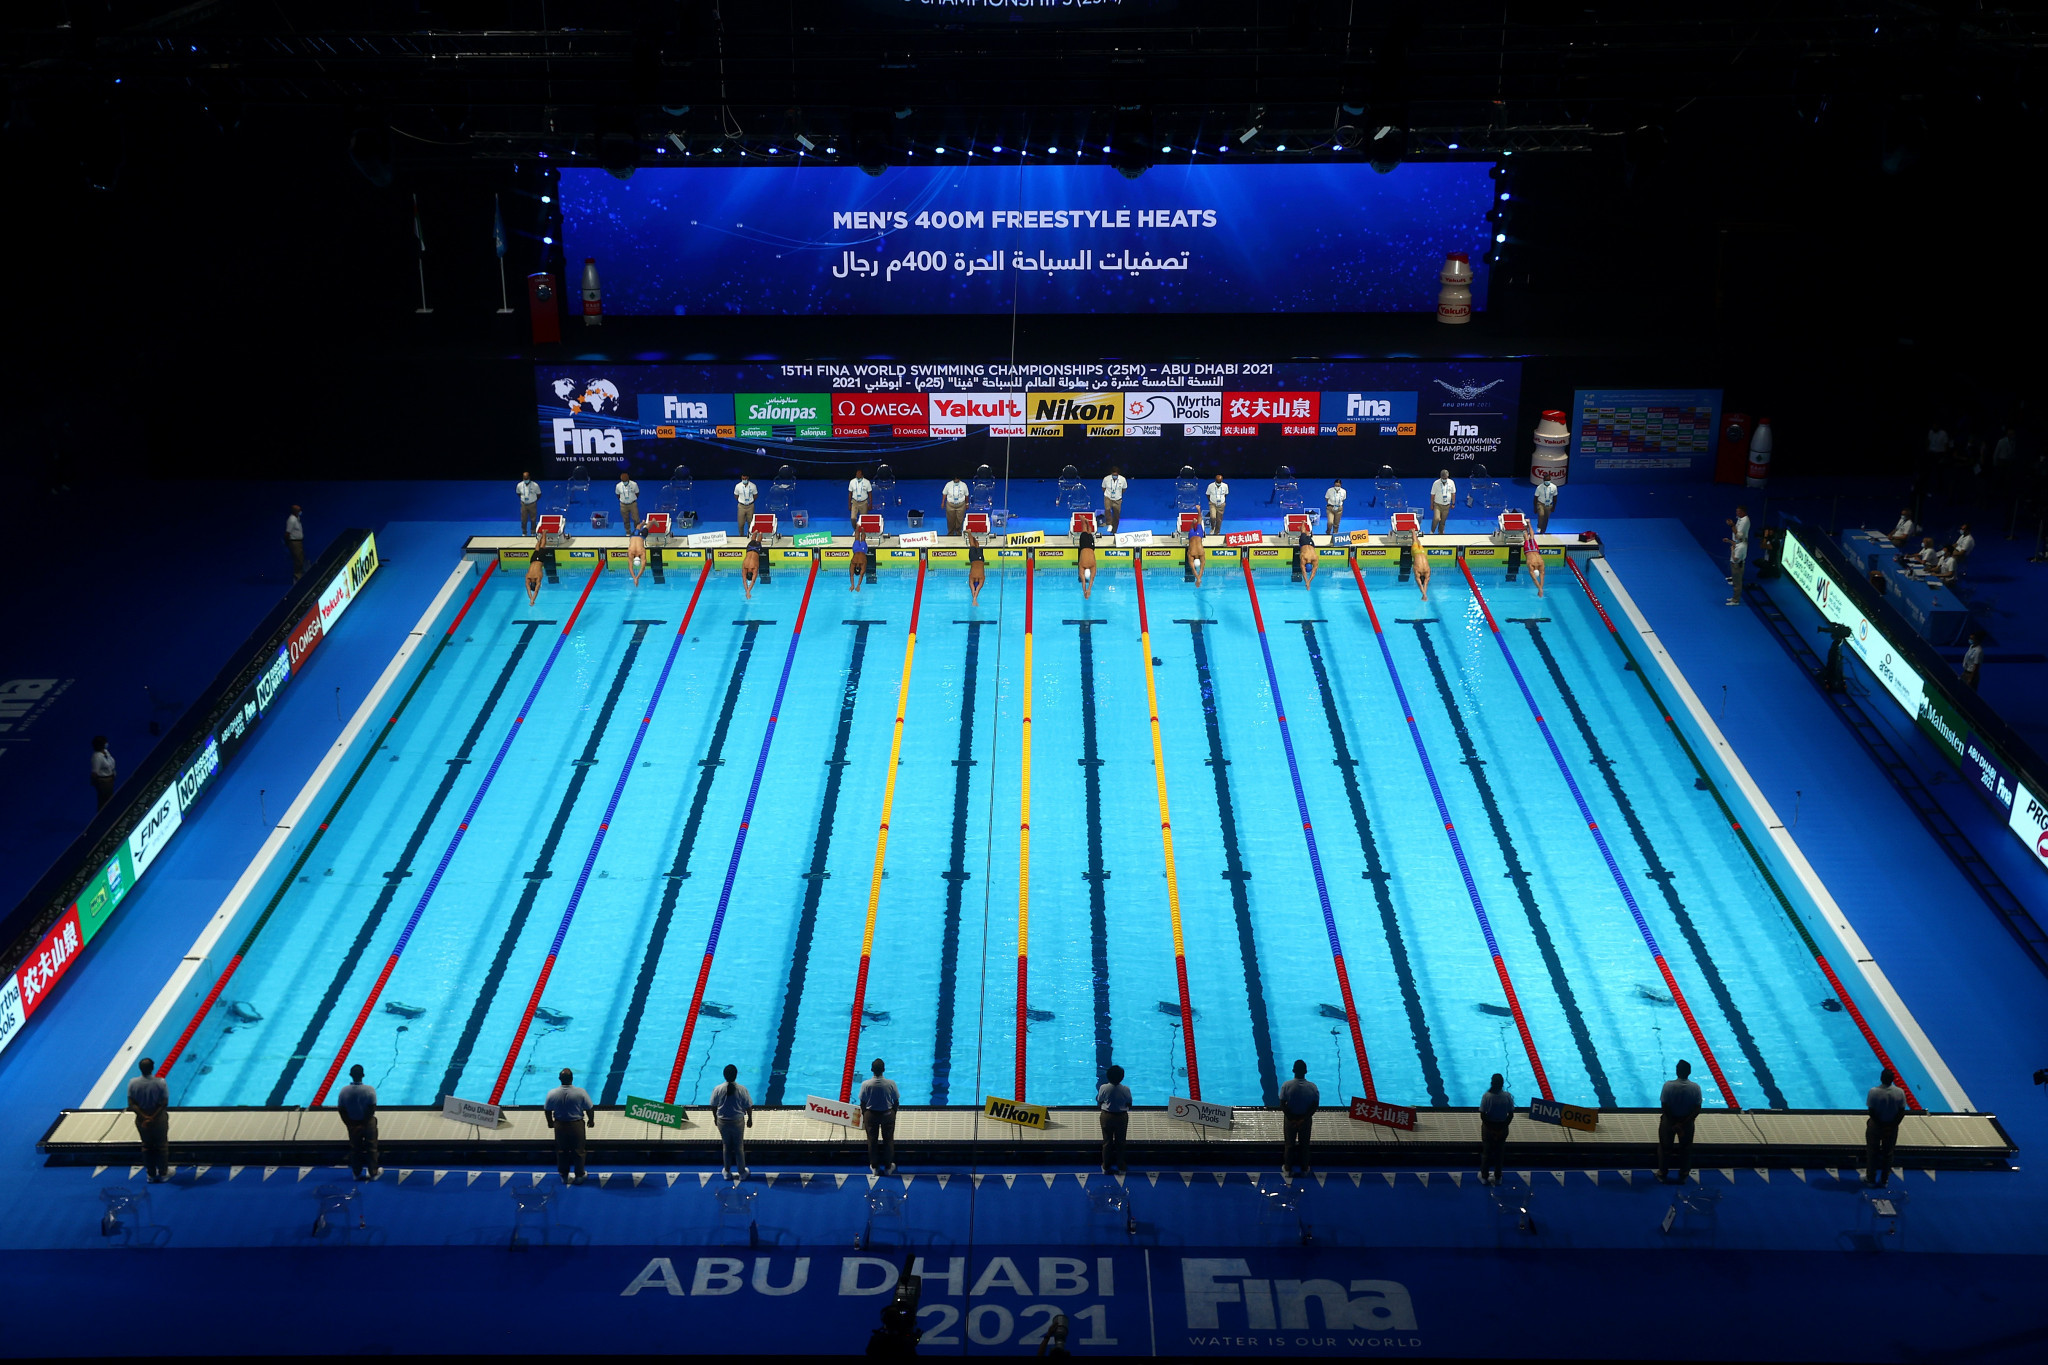 Seven test positive for COVID-19 at FINA World Swimming Championships (25m)